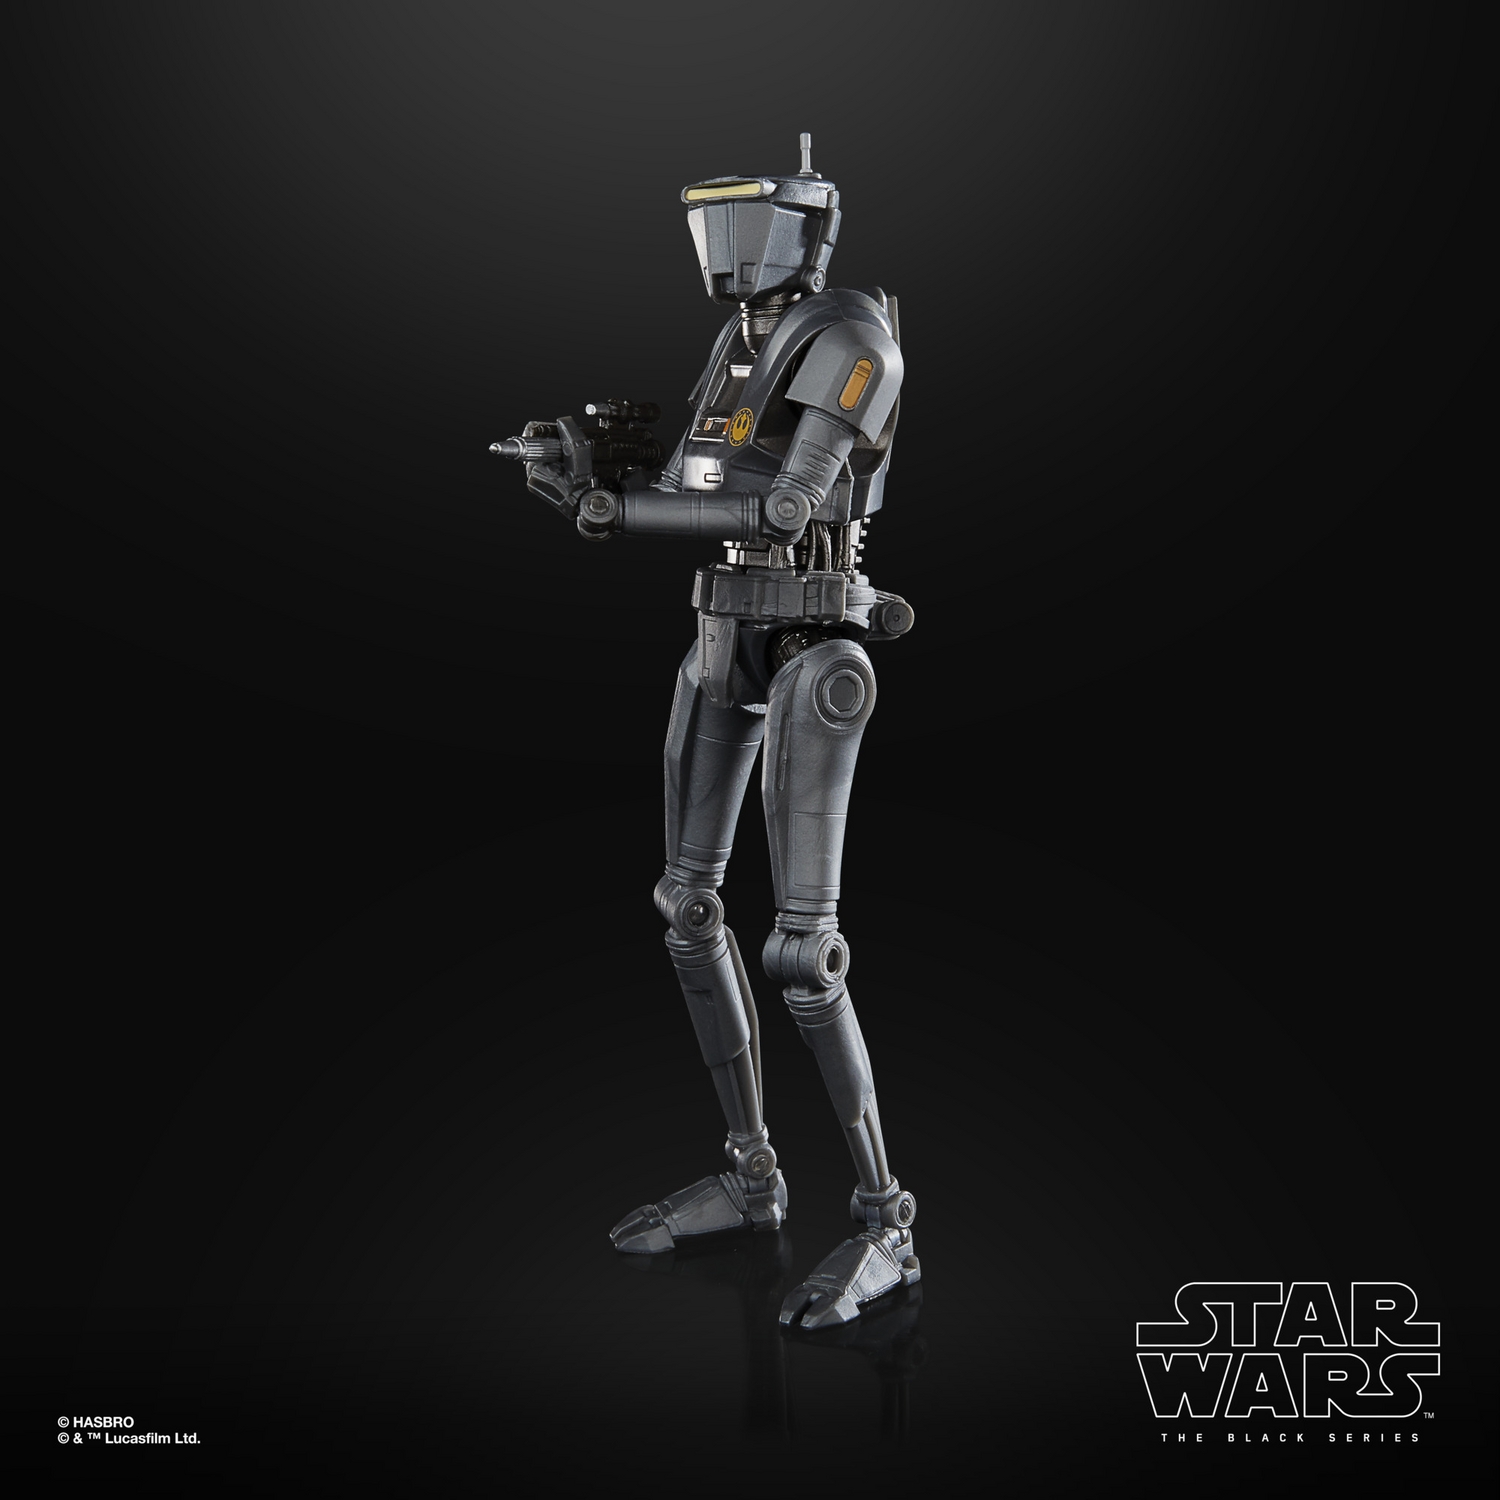 STAR WARS THE BLACK SERIES 6-INCH NEW REPUBLIC SECURITY DROID FIGURE - 5.jpg